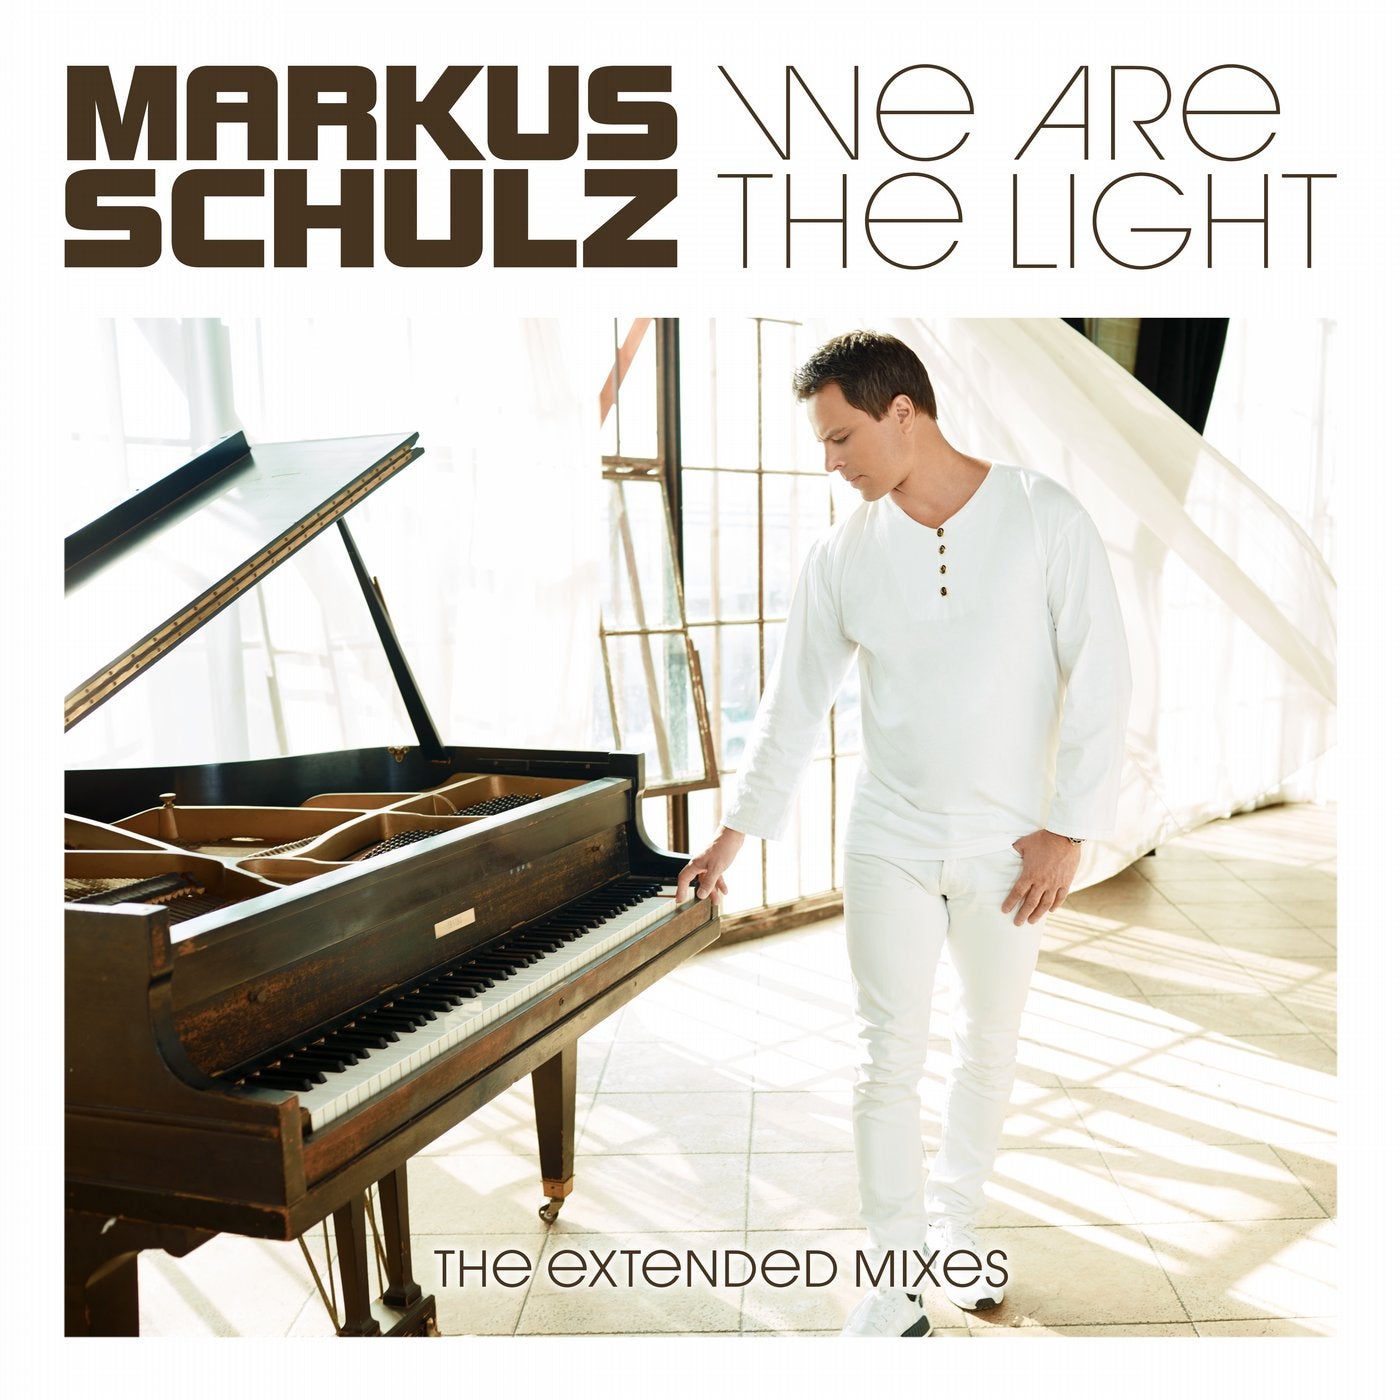 We Are the Light - The Extended Mixes